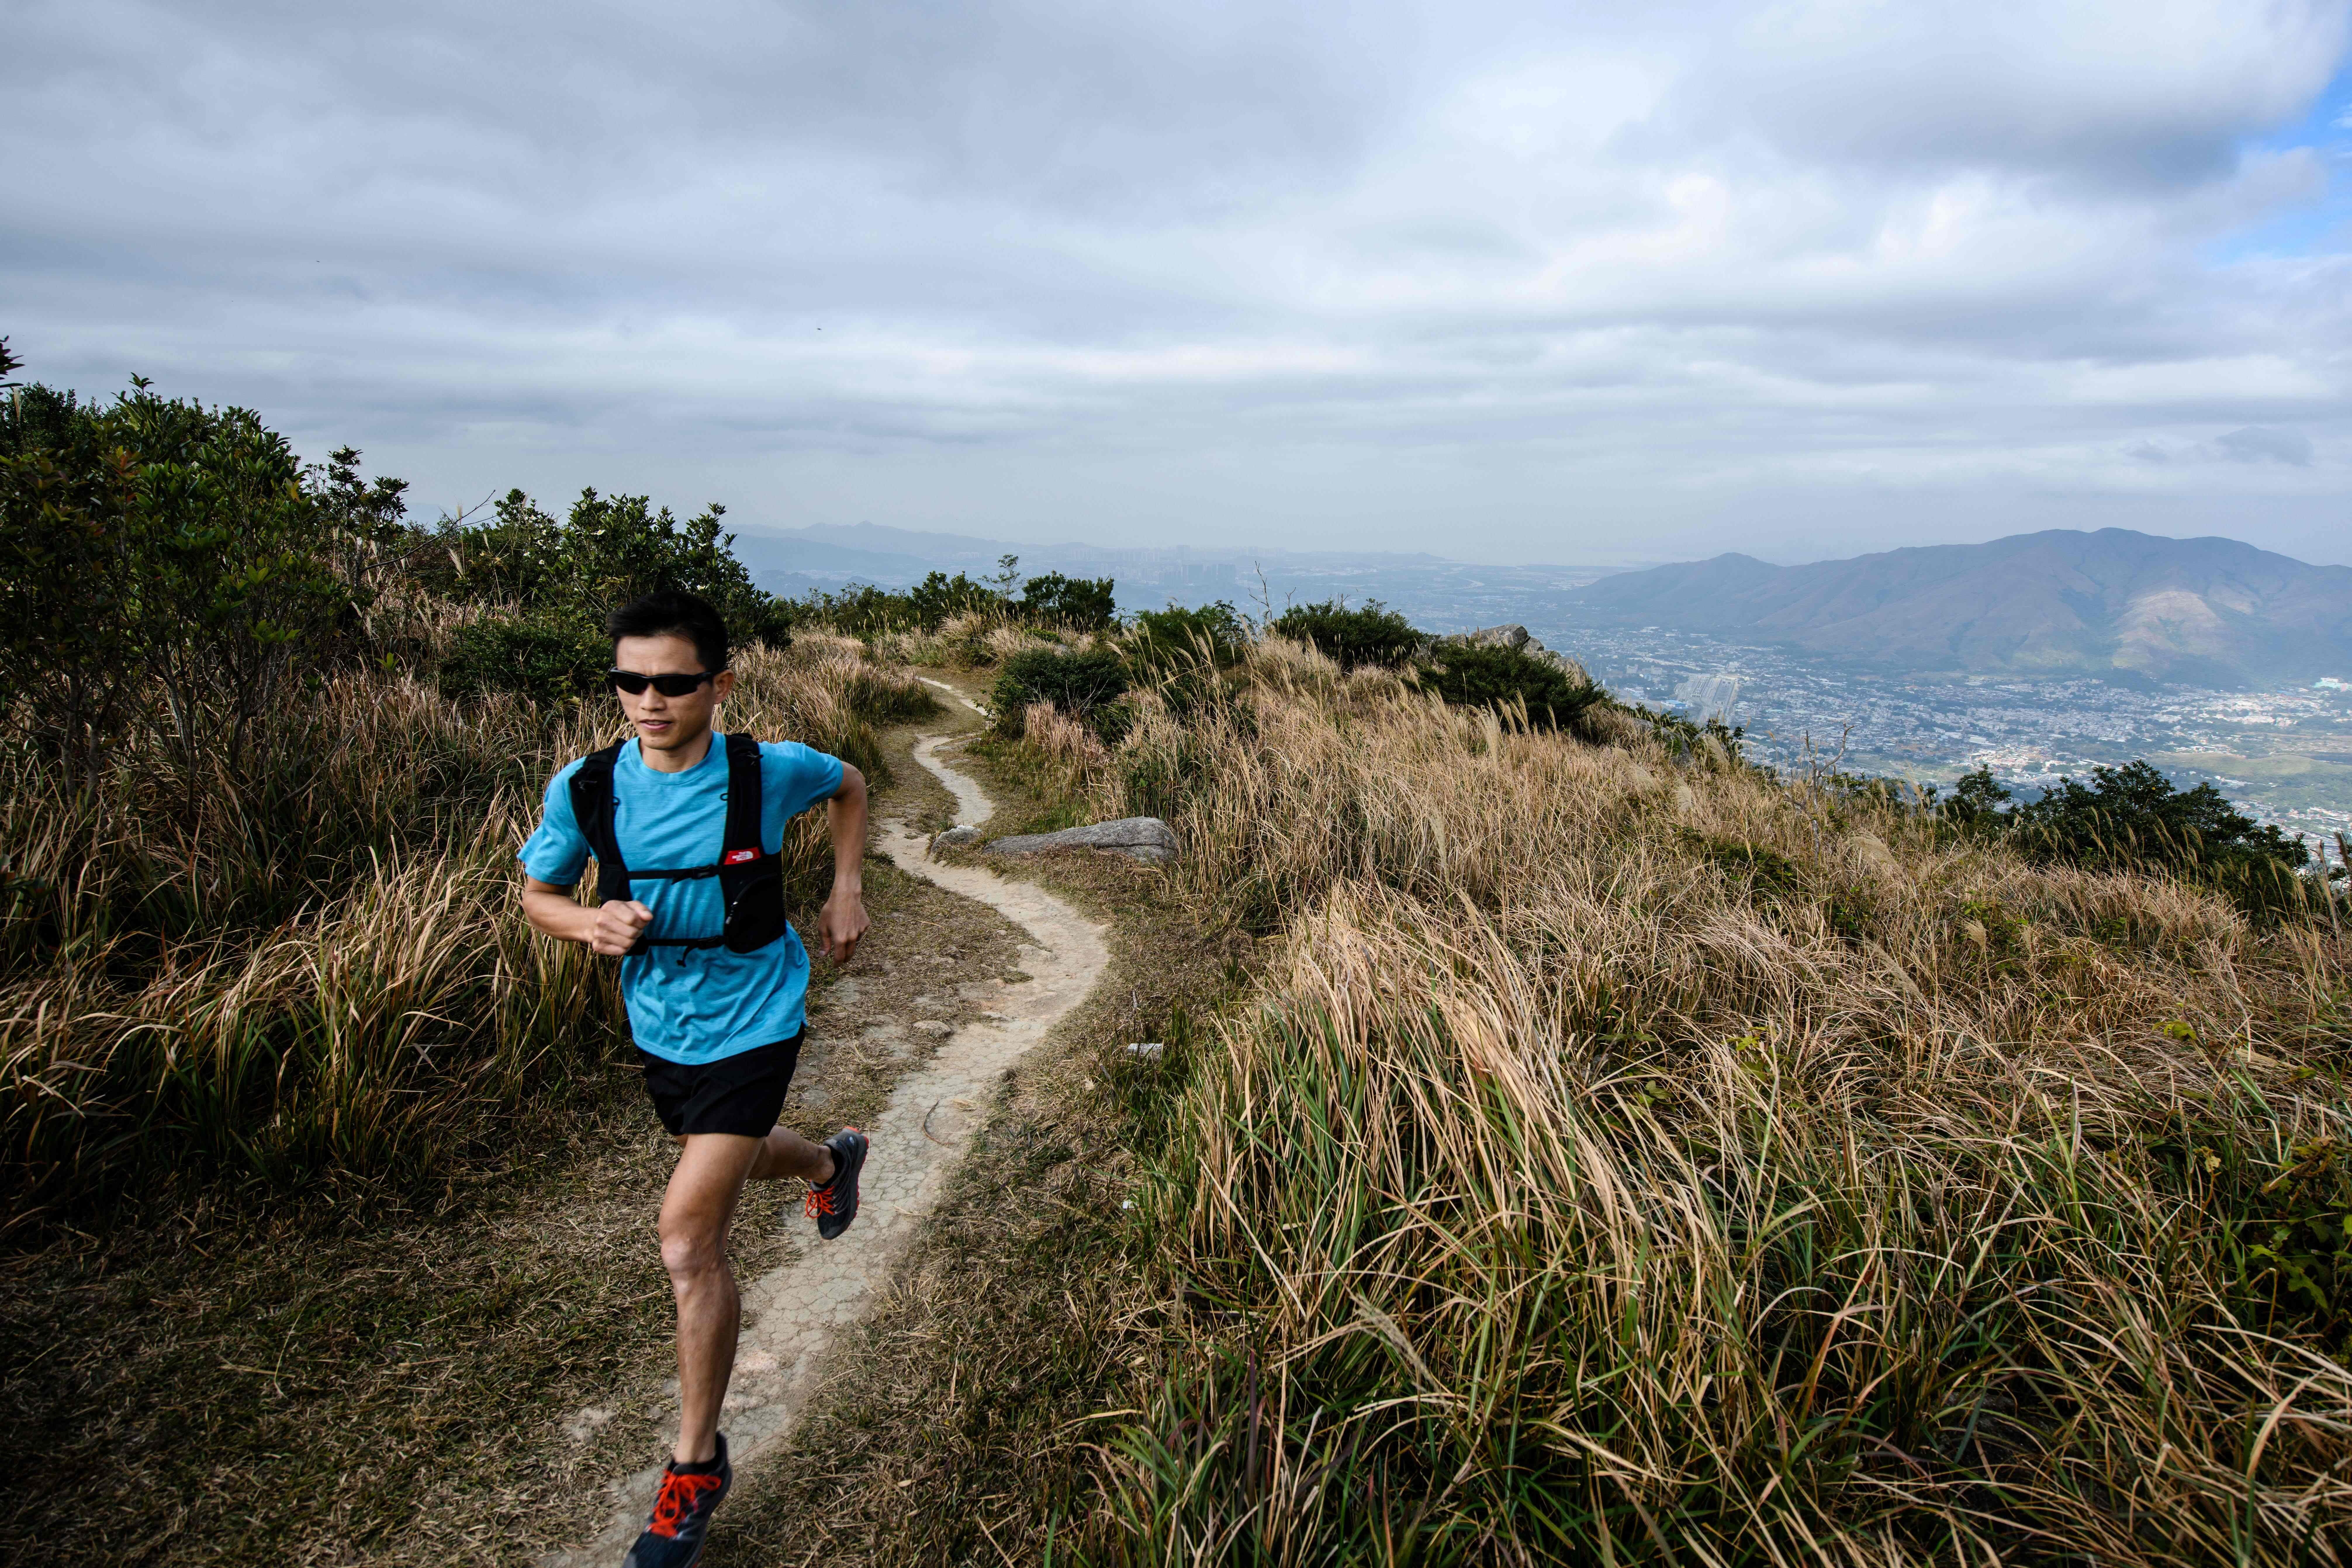 Stone Tsang Siu-keung knows a mask will make running uncomfortable but hopes people will comply. Photo: Agence France-Presse